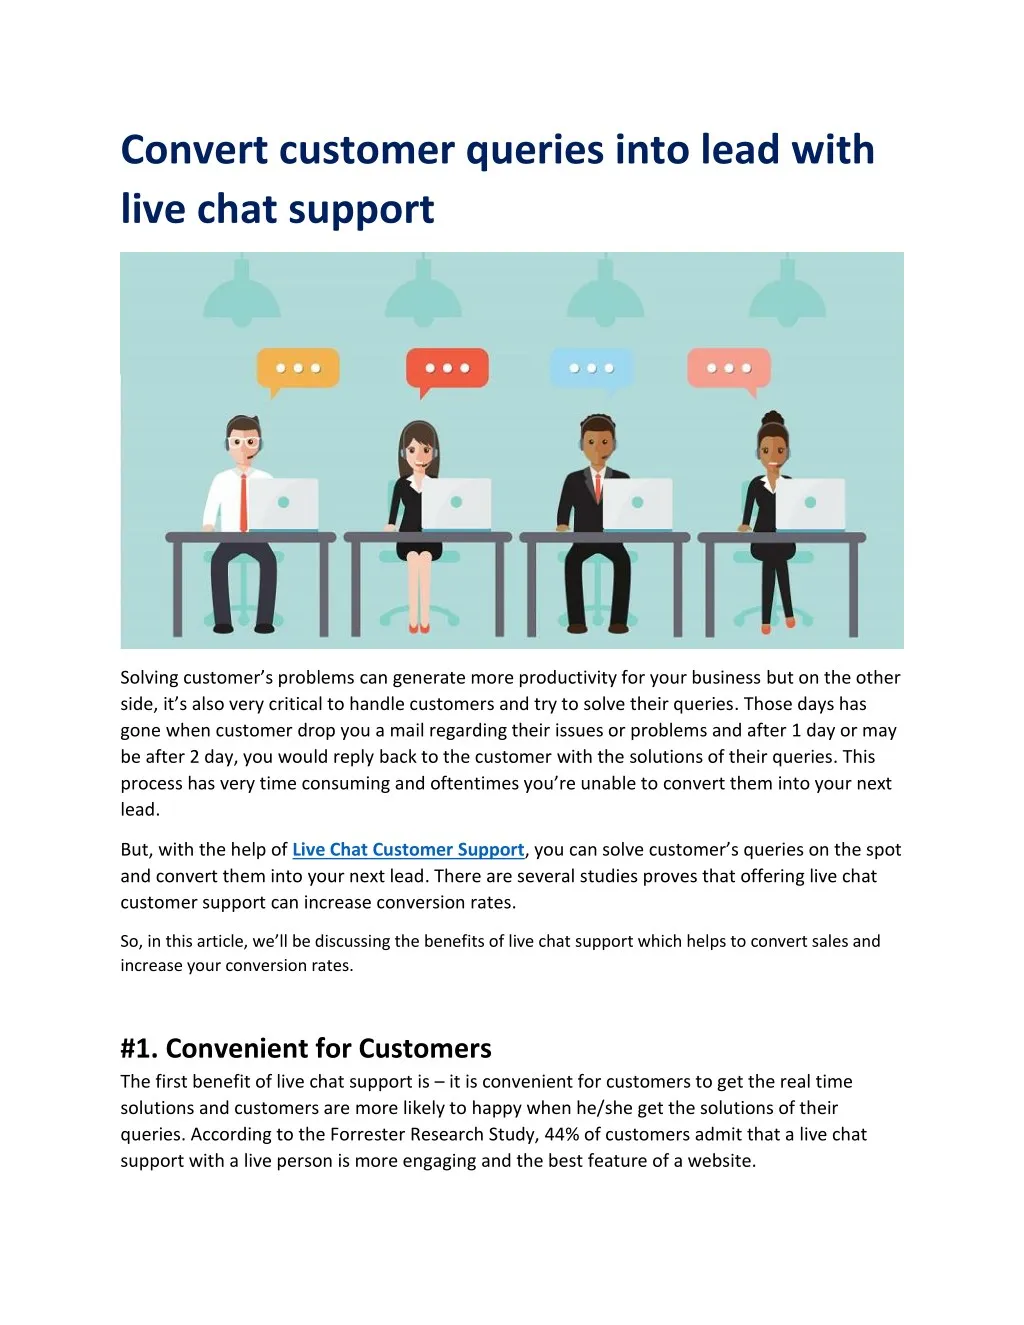 convert customer queries into lead with live chat